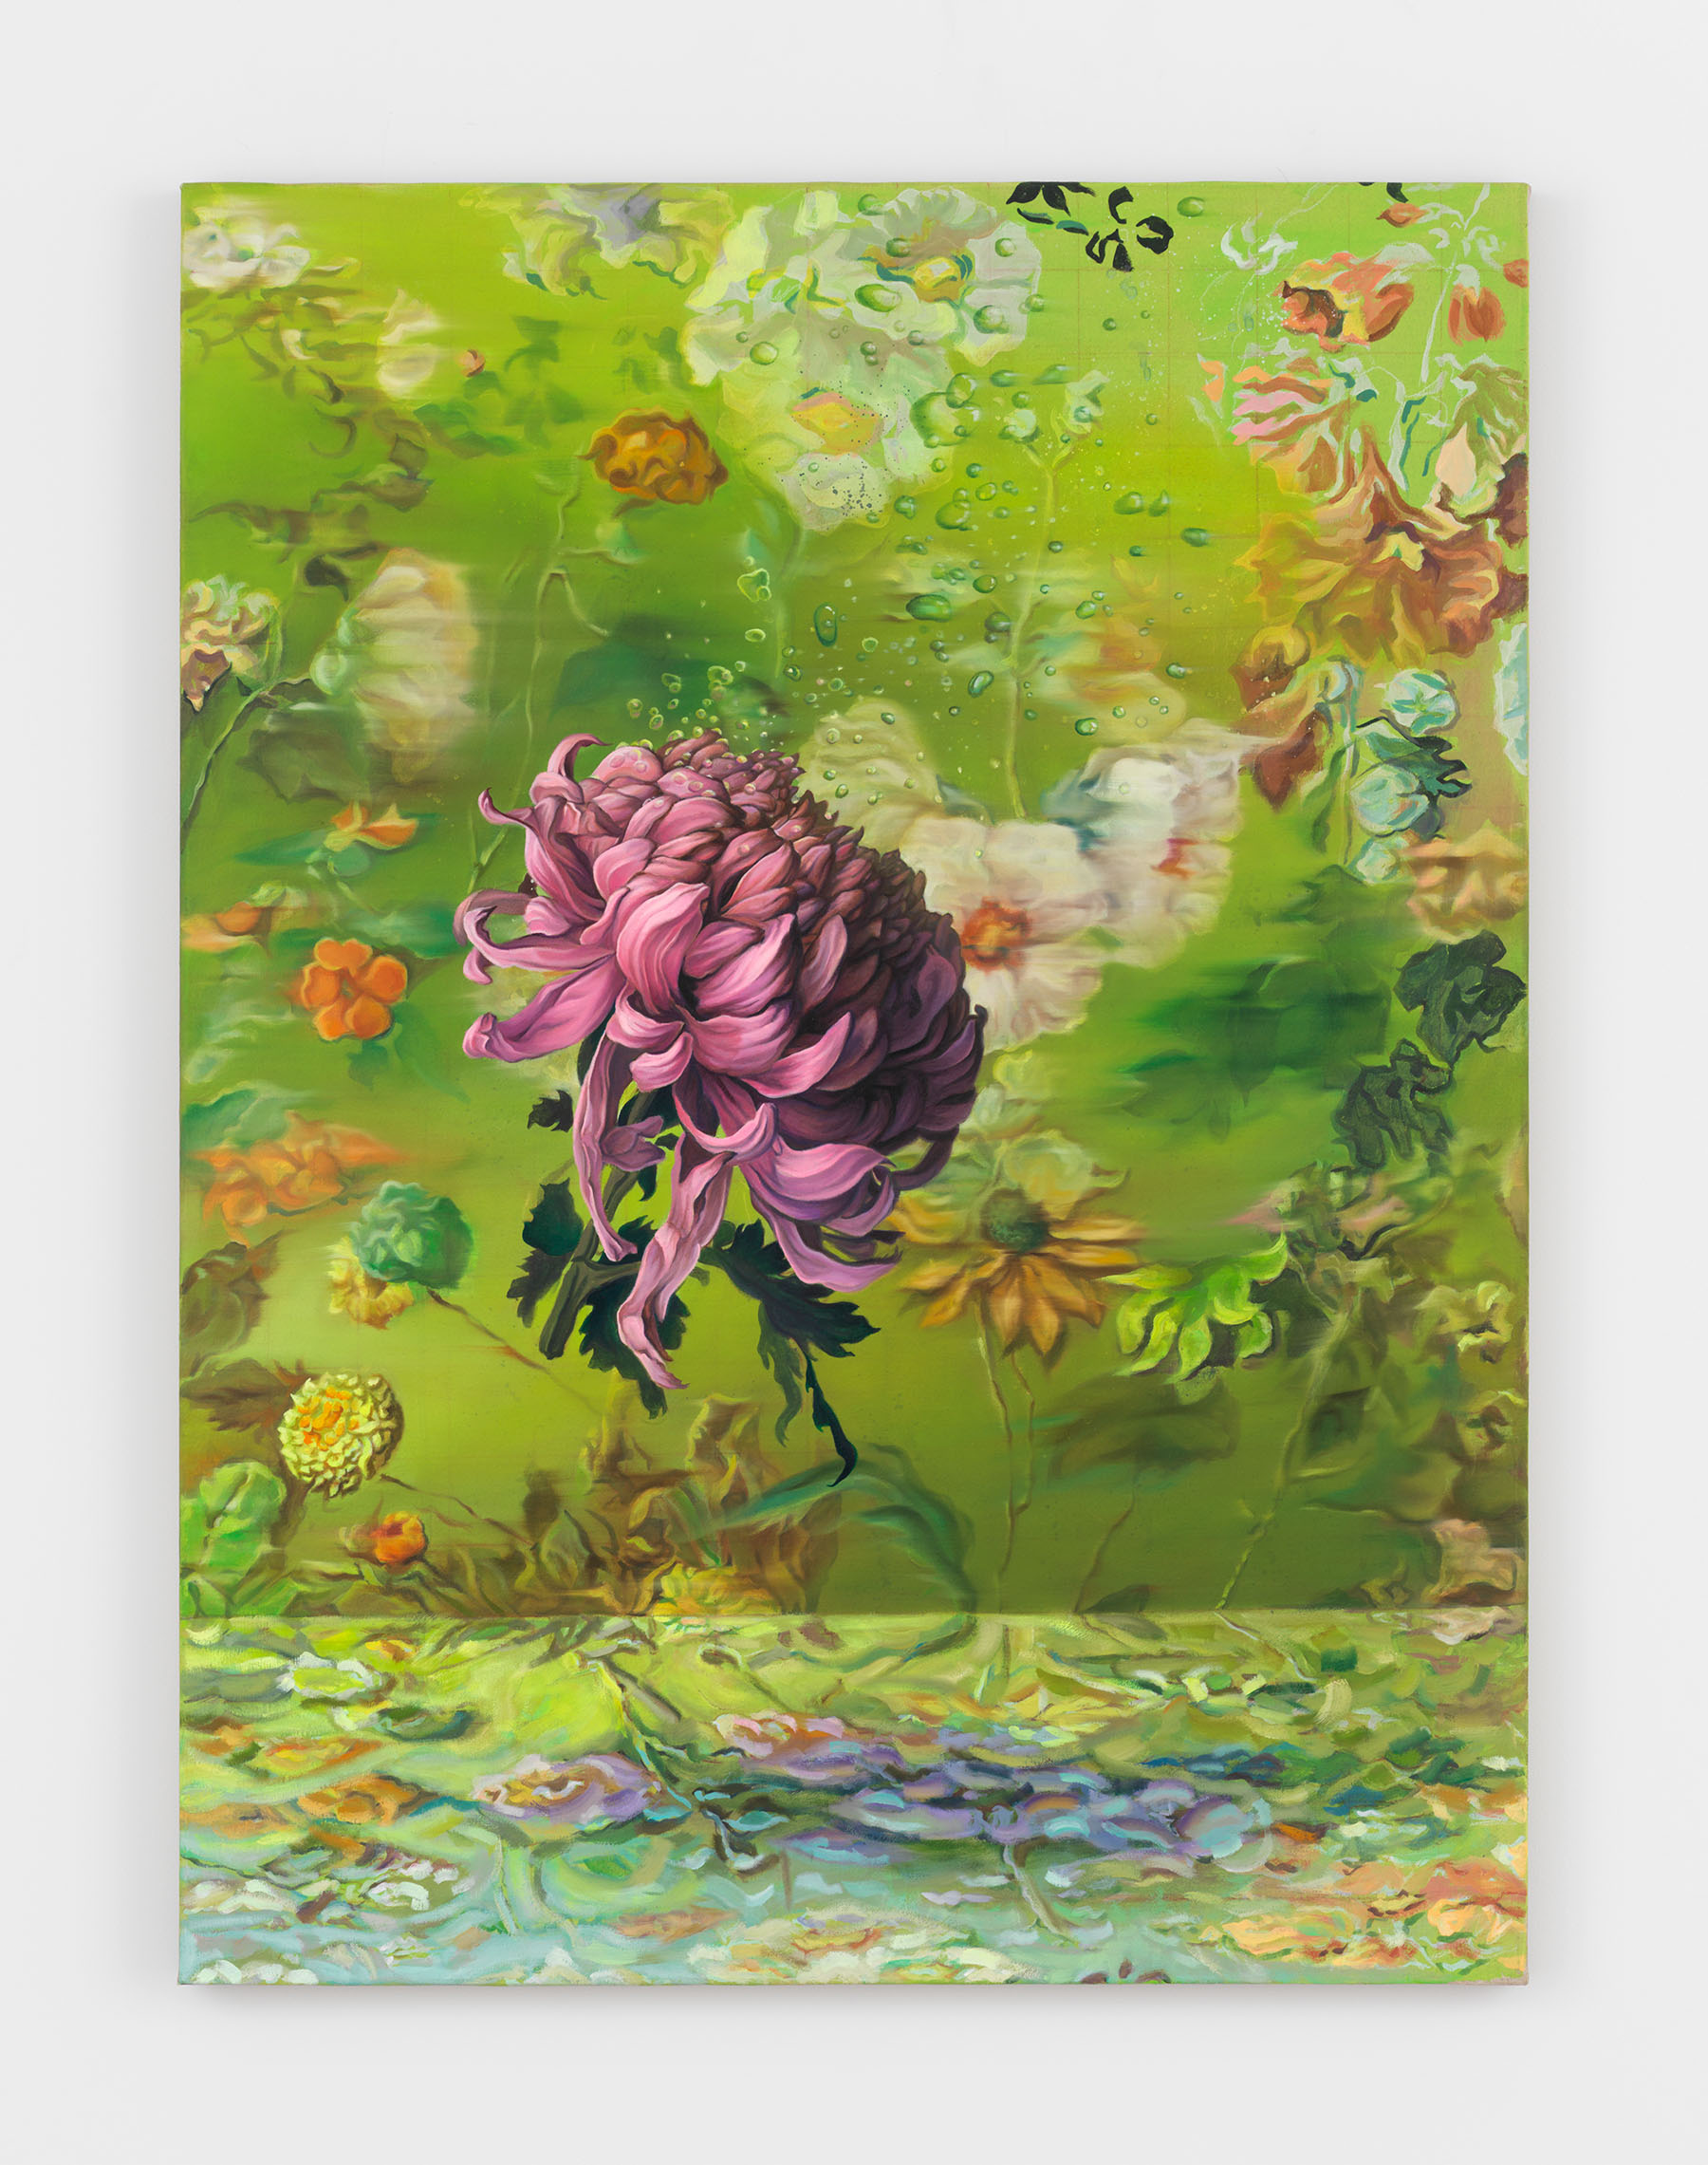 Chason Matthams, Dahlia w/ Hyacinthe Rigaud’s study of flowers, 2021, Oil on linen, 40 x 30 in.